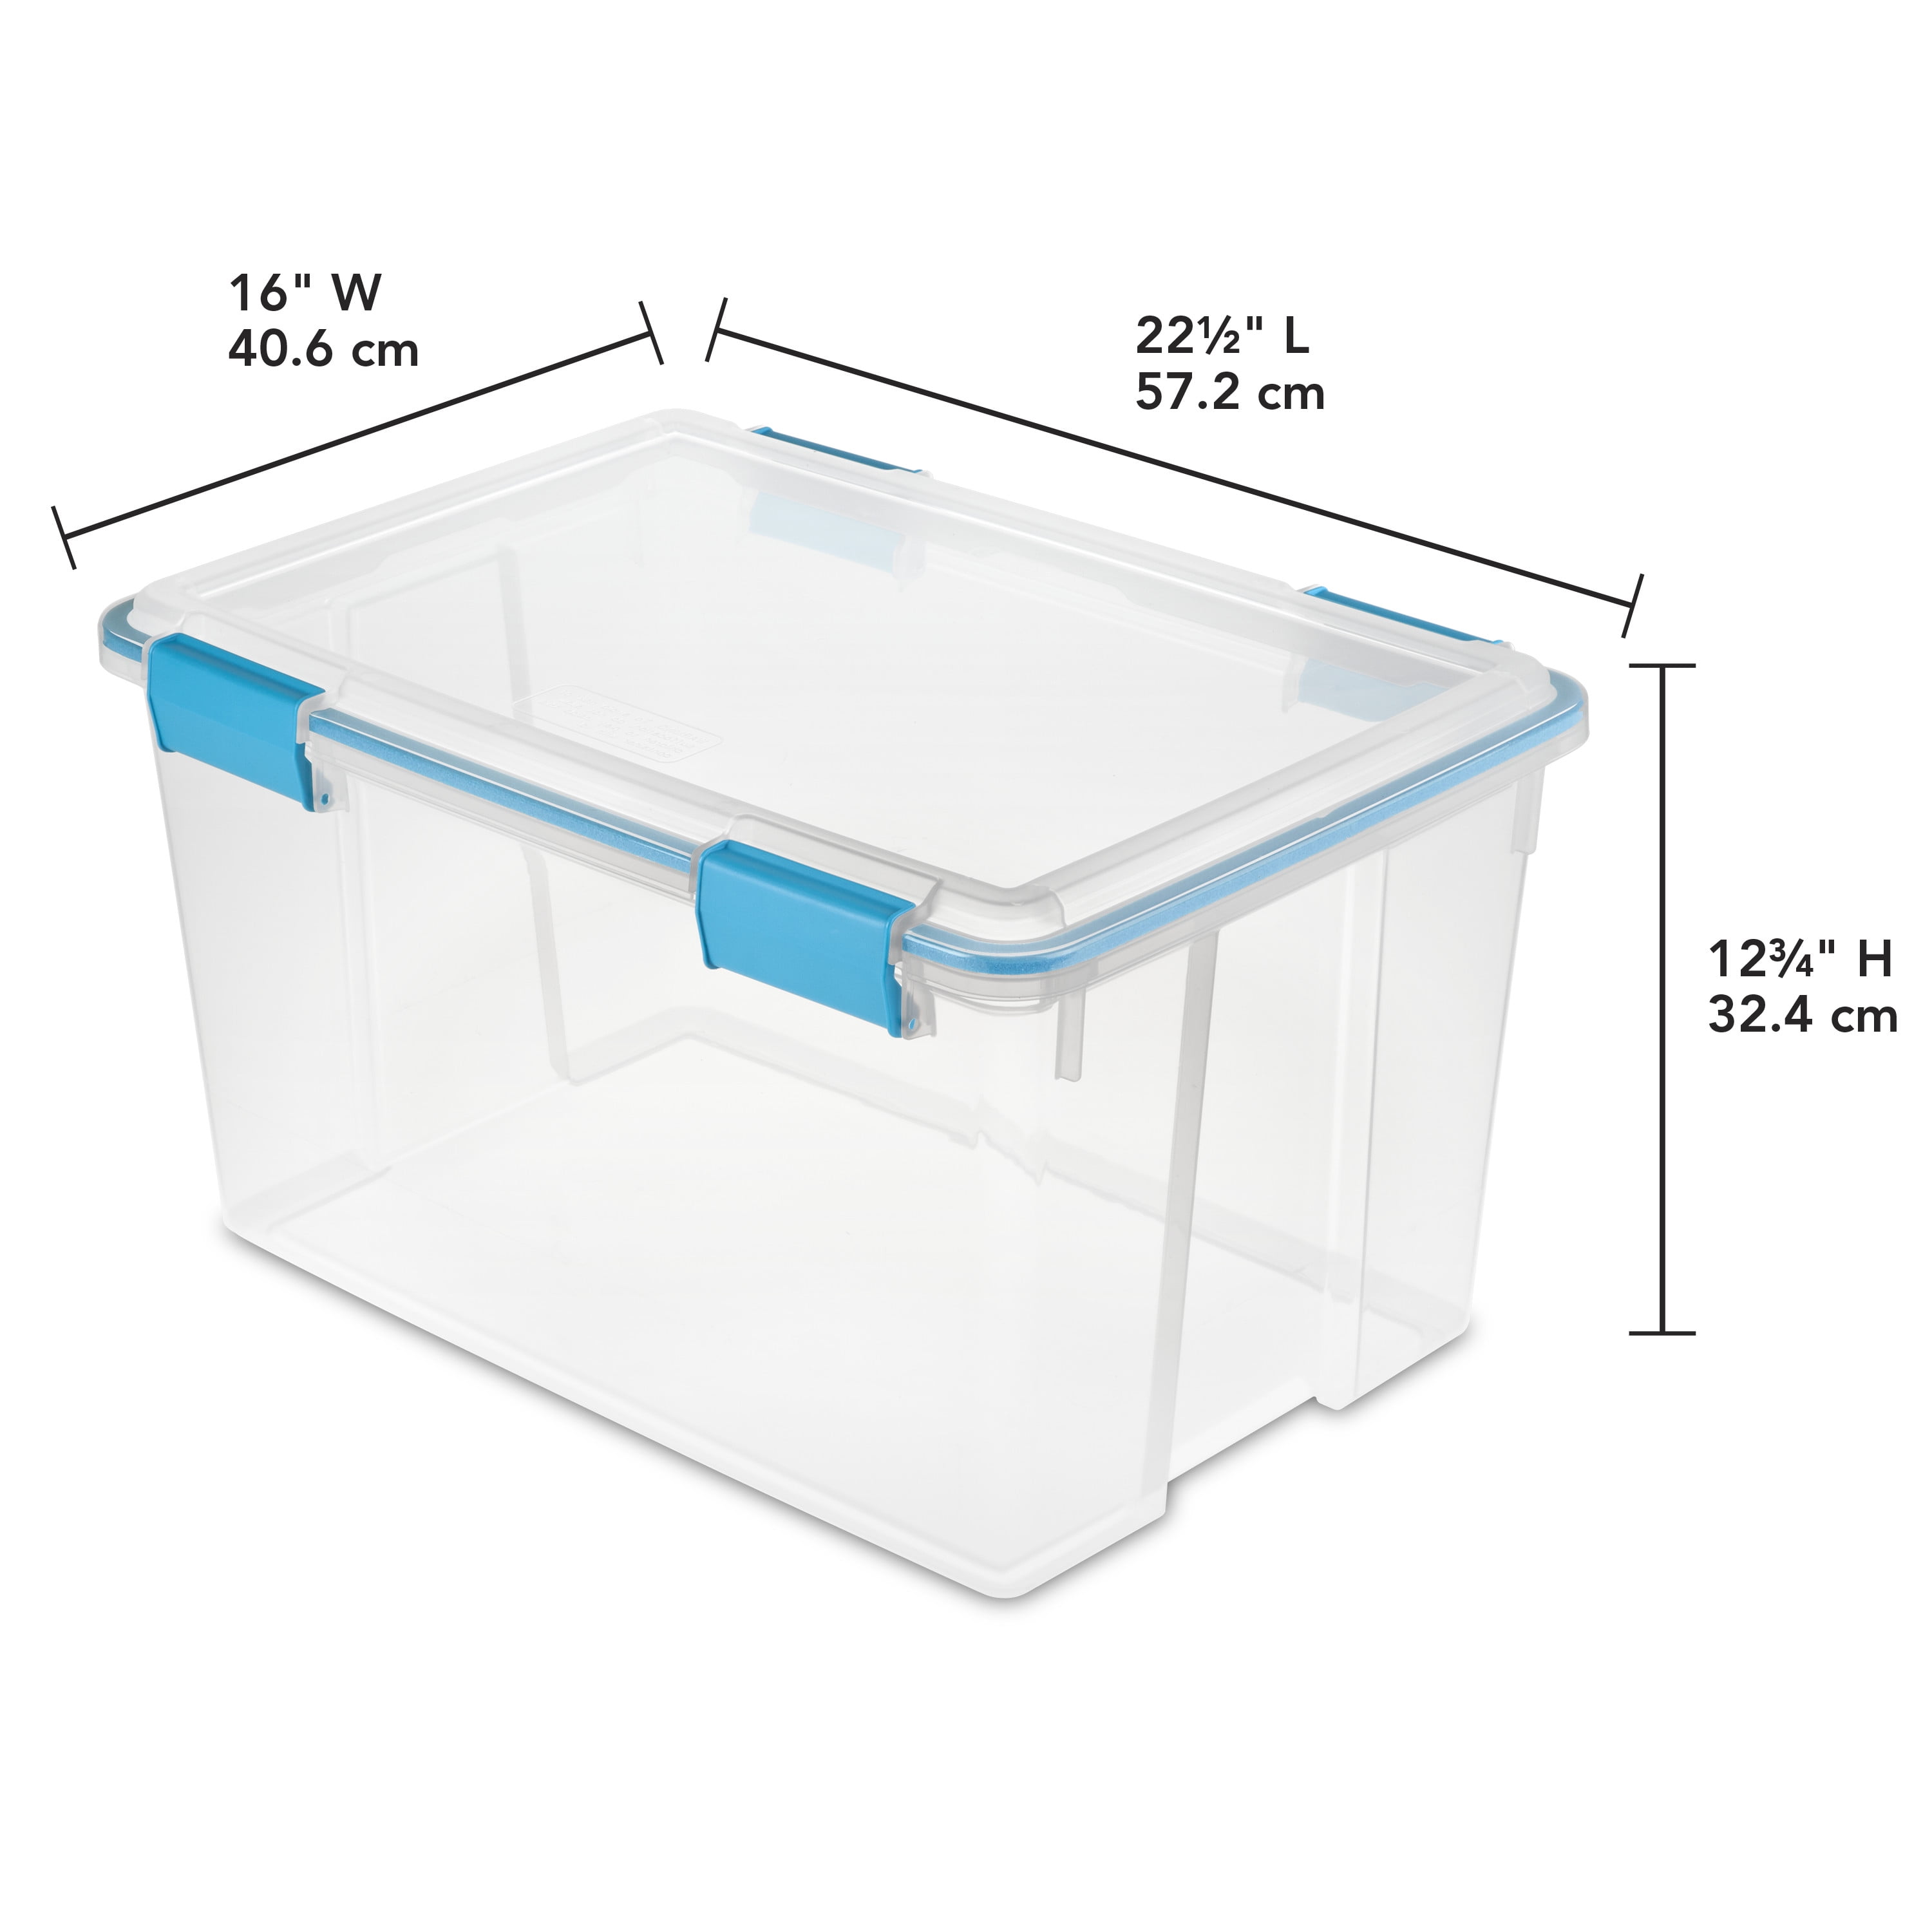 Hefty PROTECT 20 Qt. Clear Storage with Protective Seal 